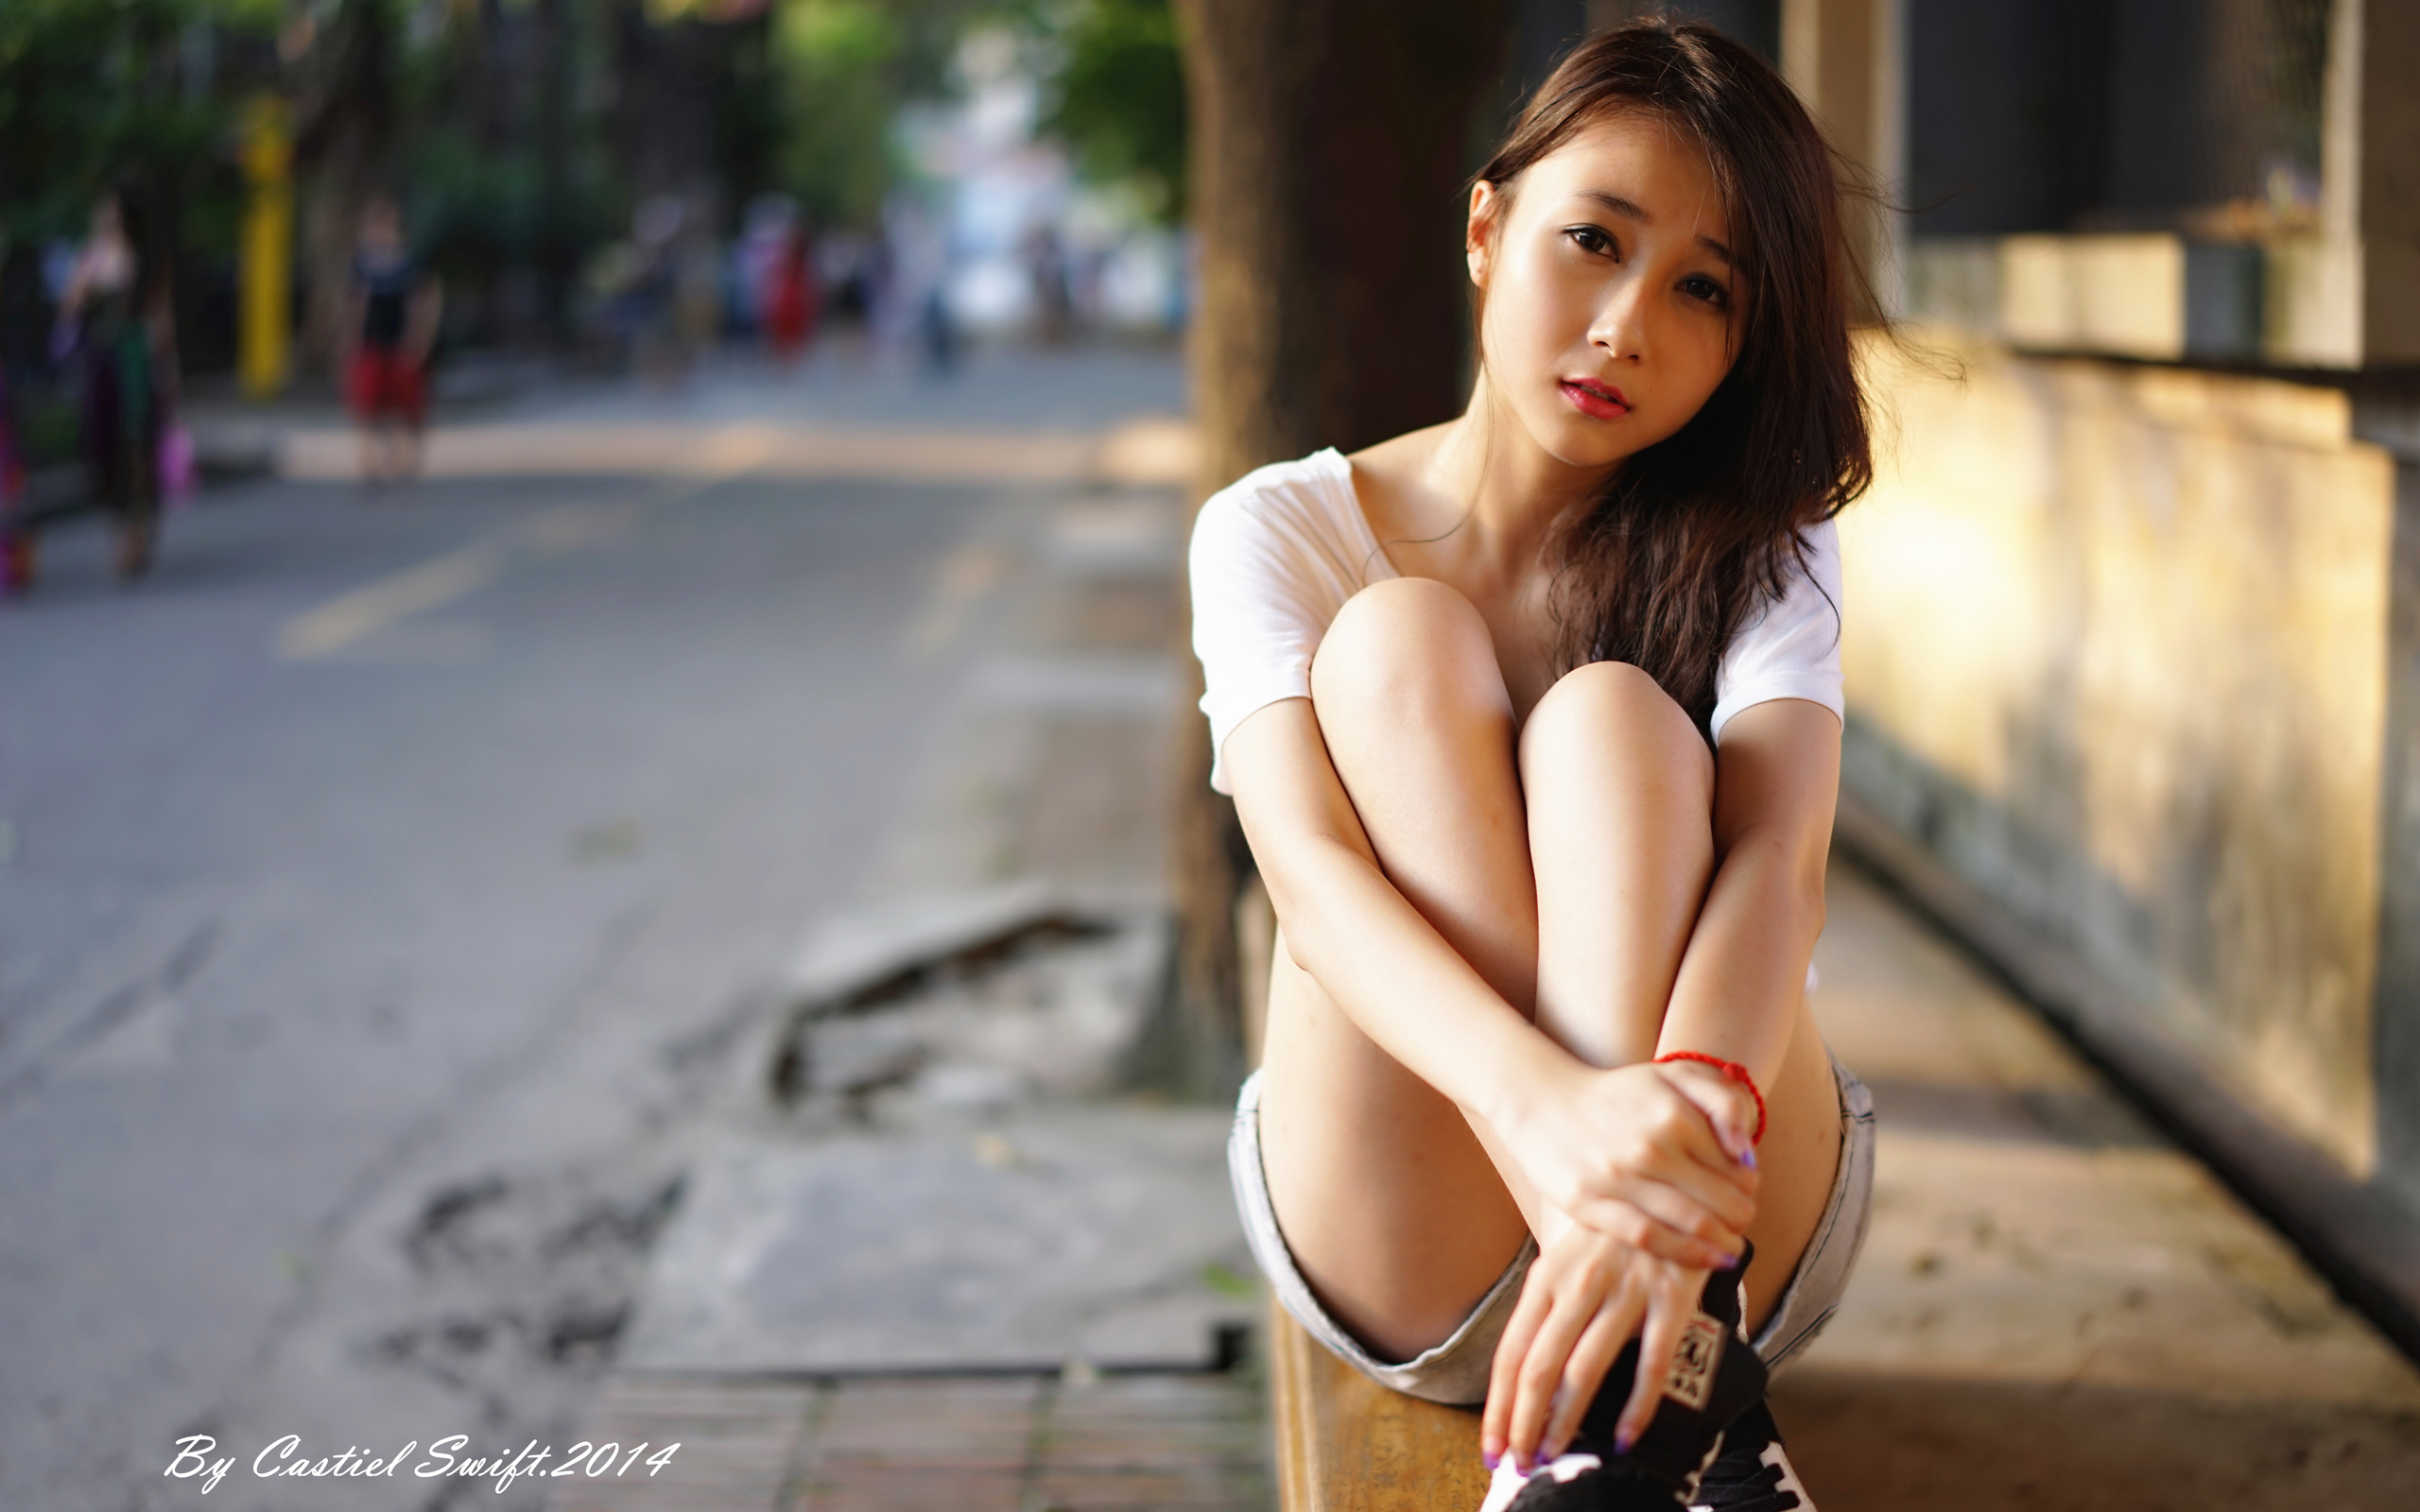 Model Red Lipstick Asian White T Shirt Jeans Shoes Sitting Legs Crossed Women Outdoors T Shirt 2560x1600